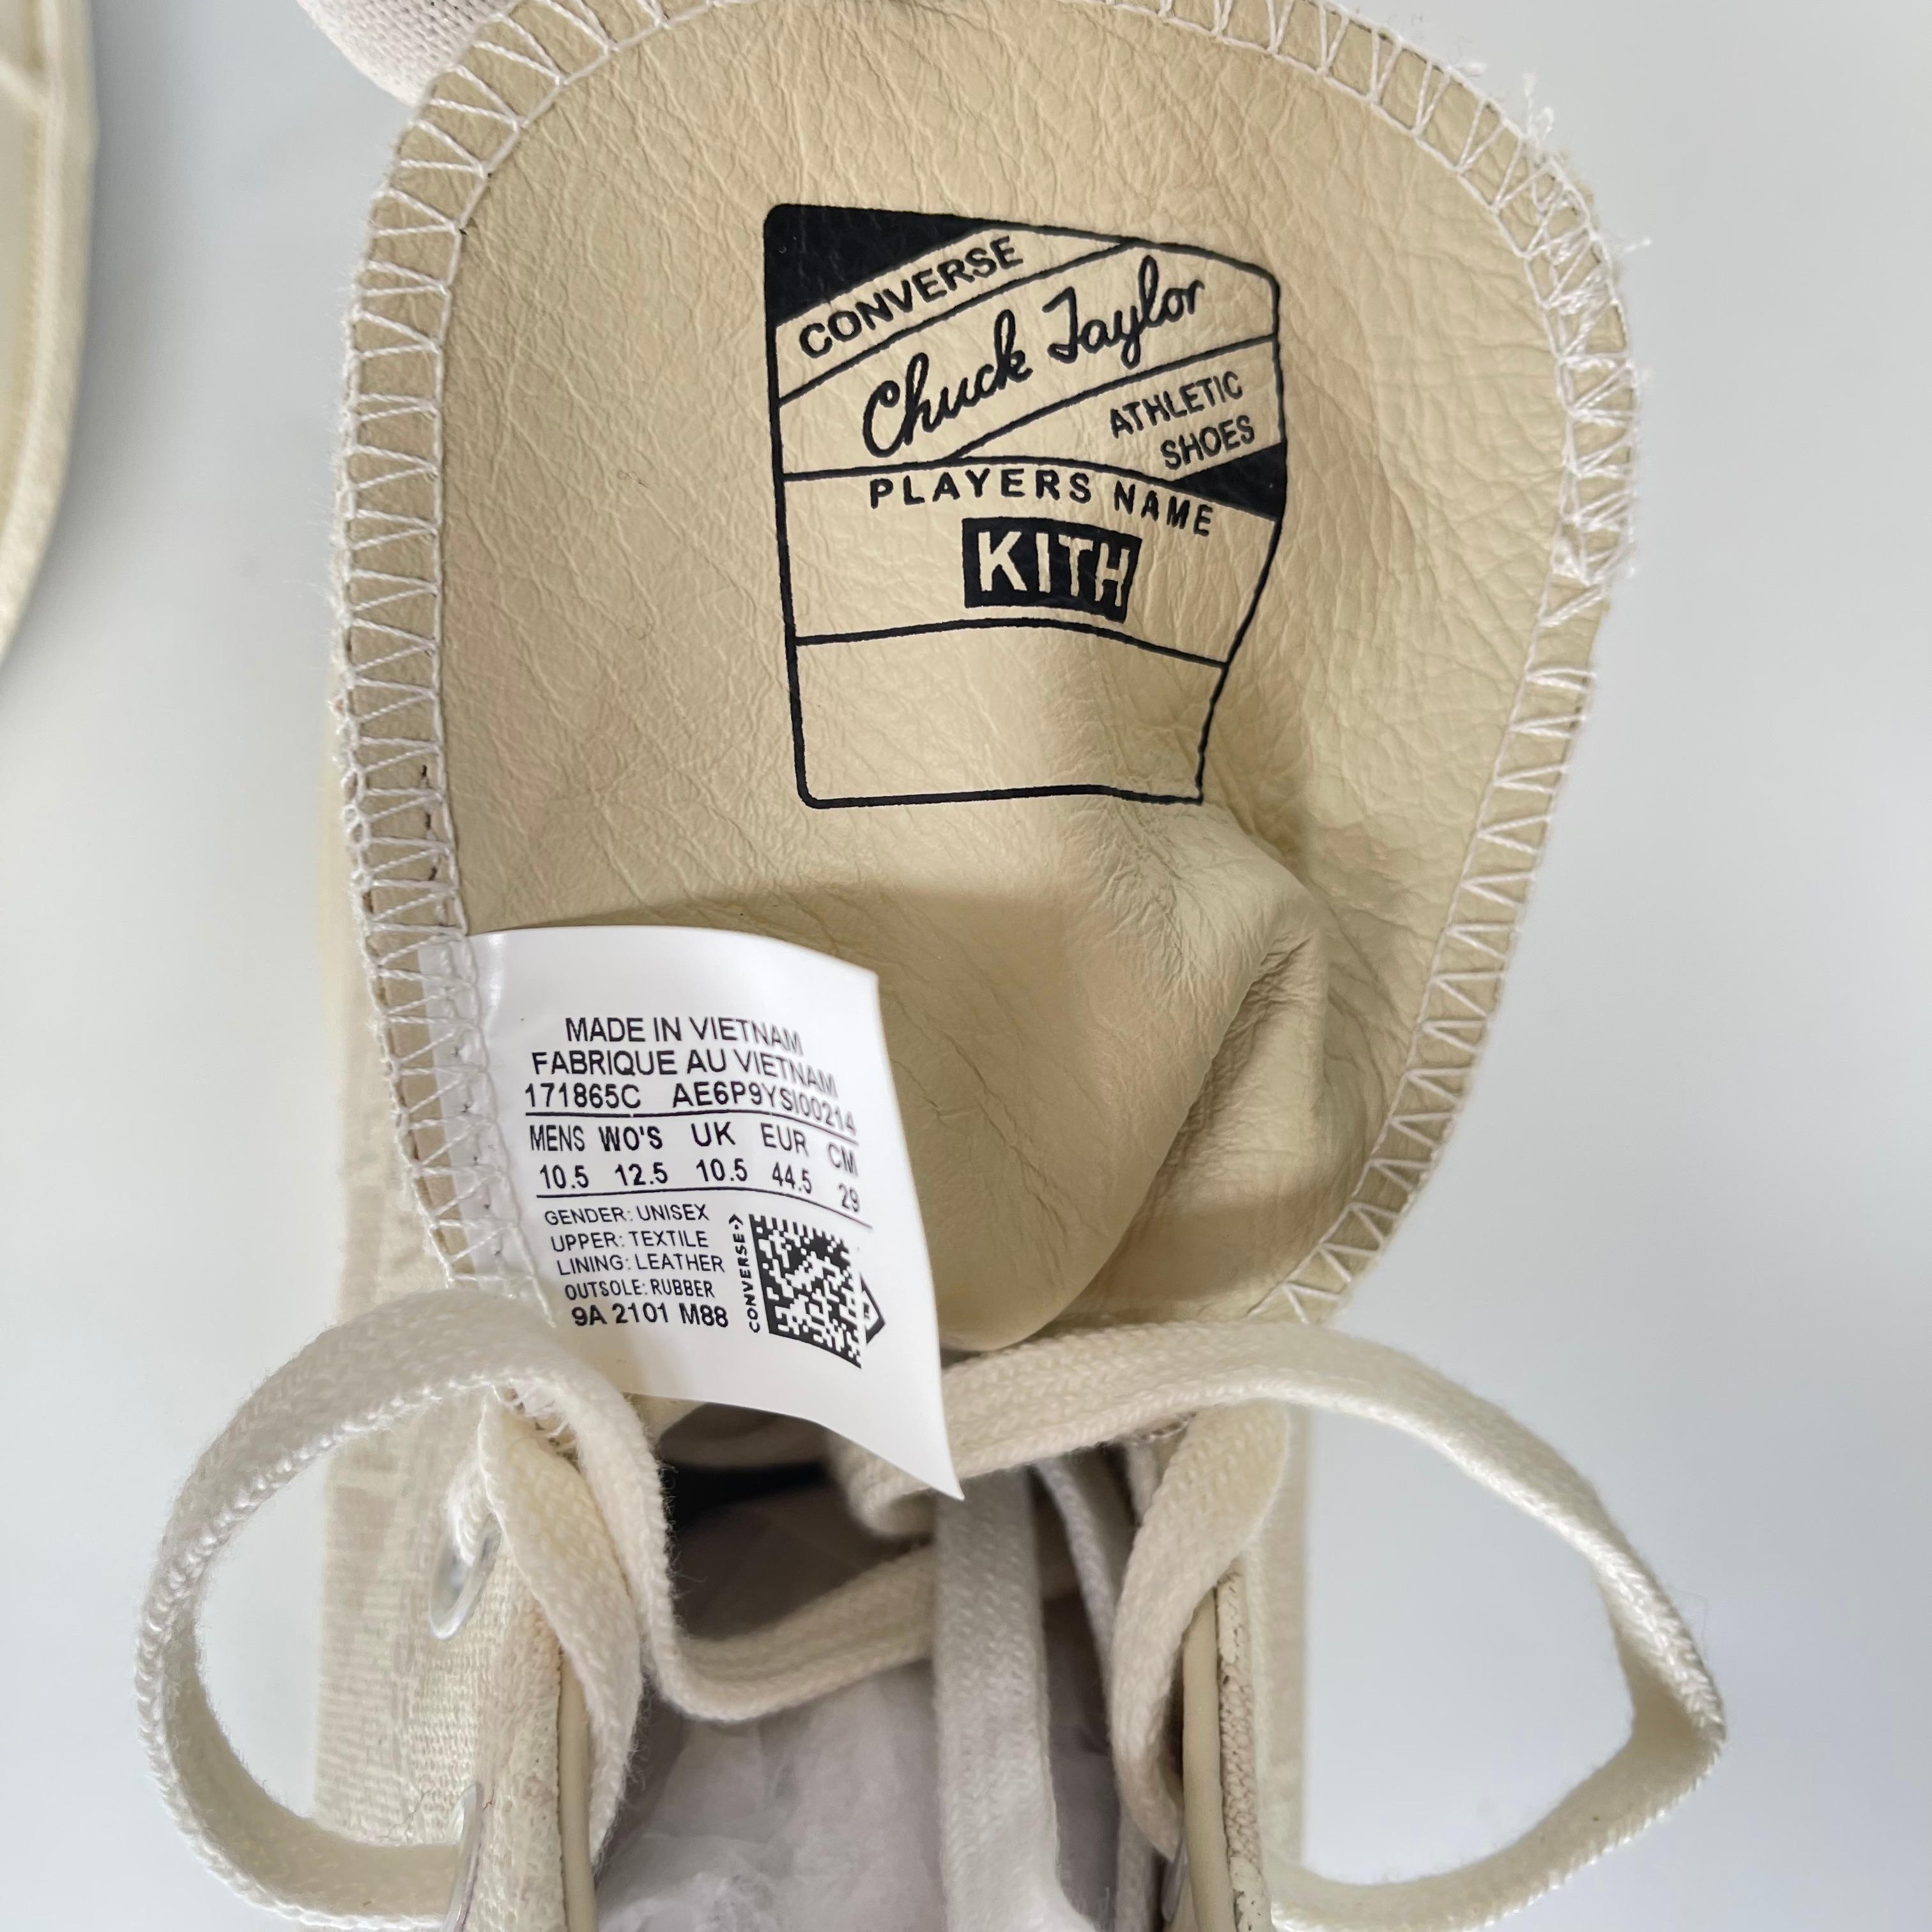 Kith x Converse Chuck Taylor All Star 1970 Classics (10.5 US) In New Condition For Sale In Montreal, Quebec